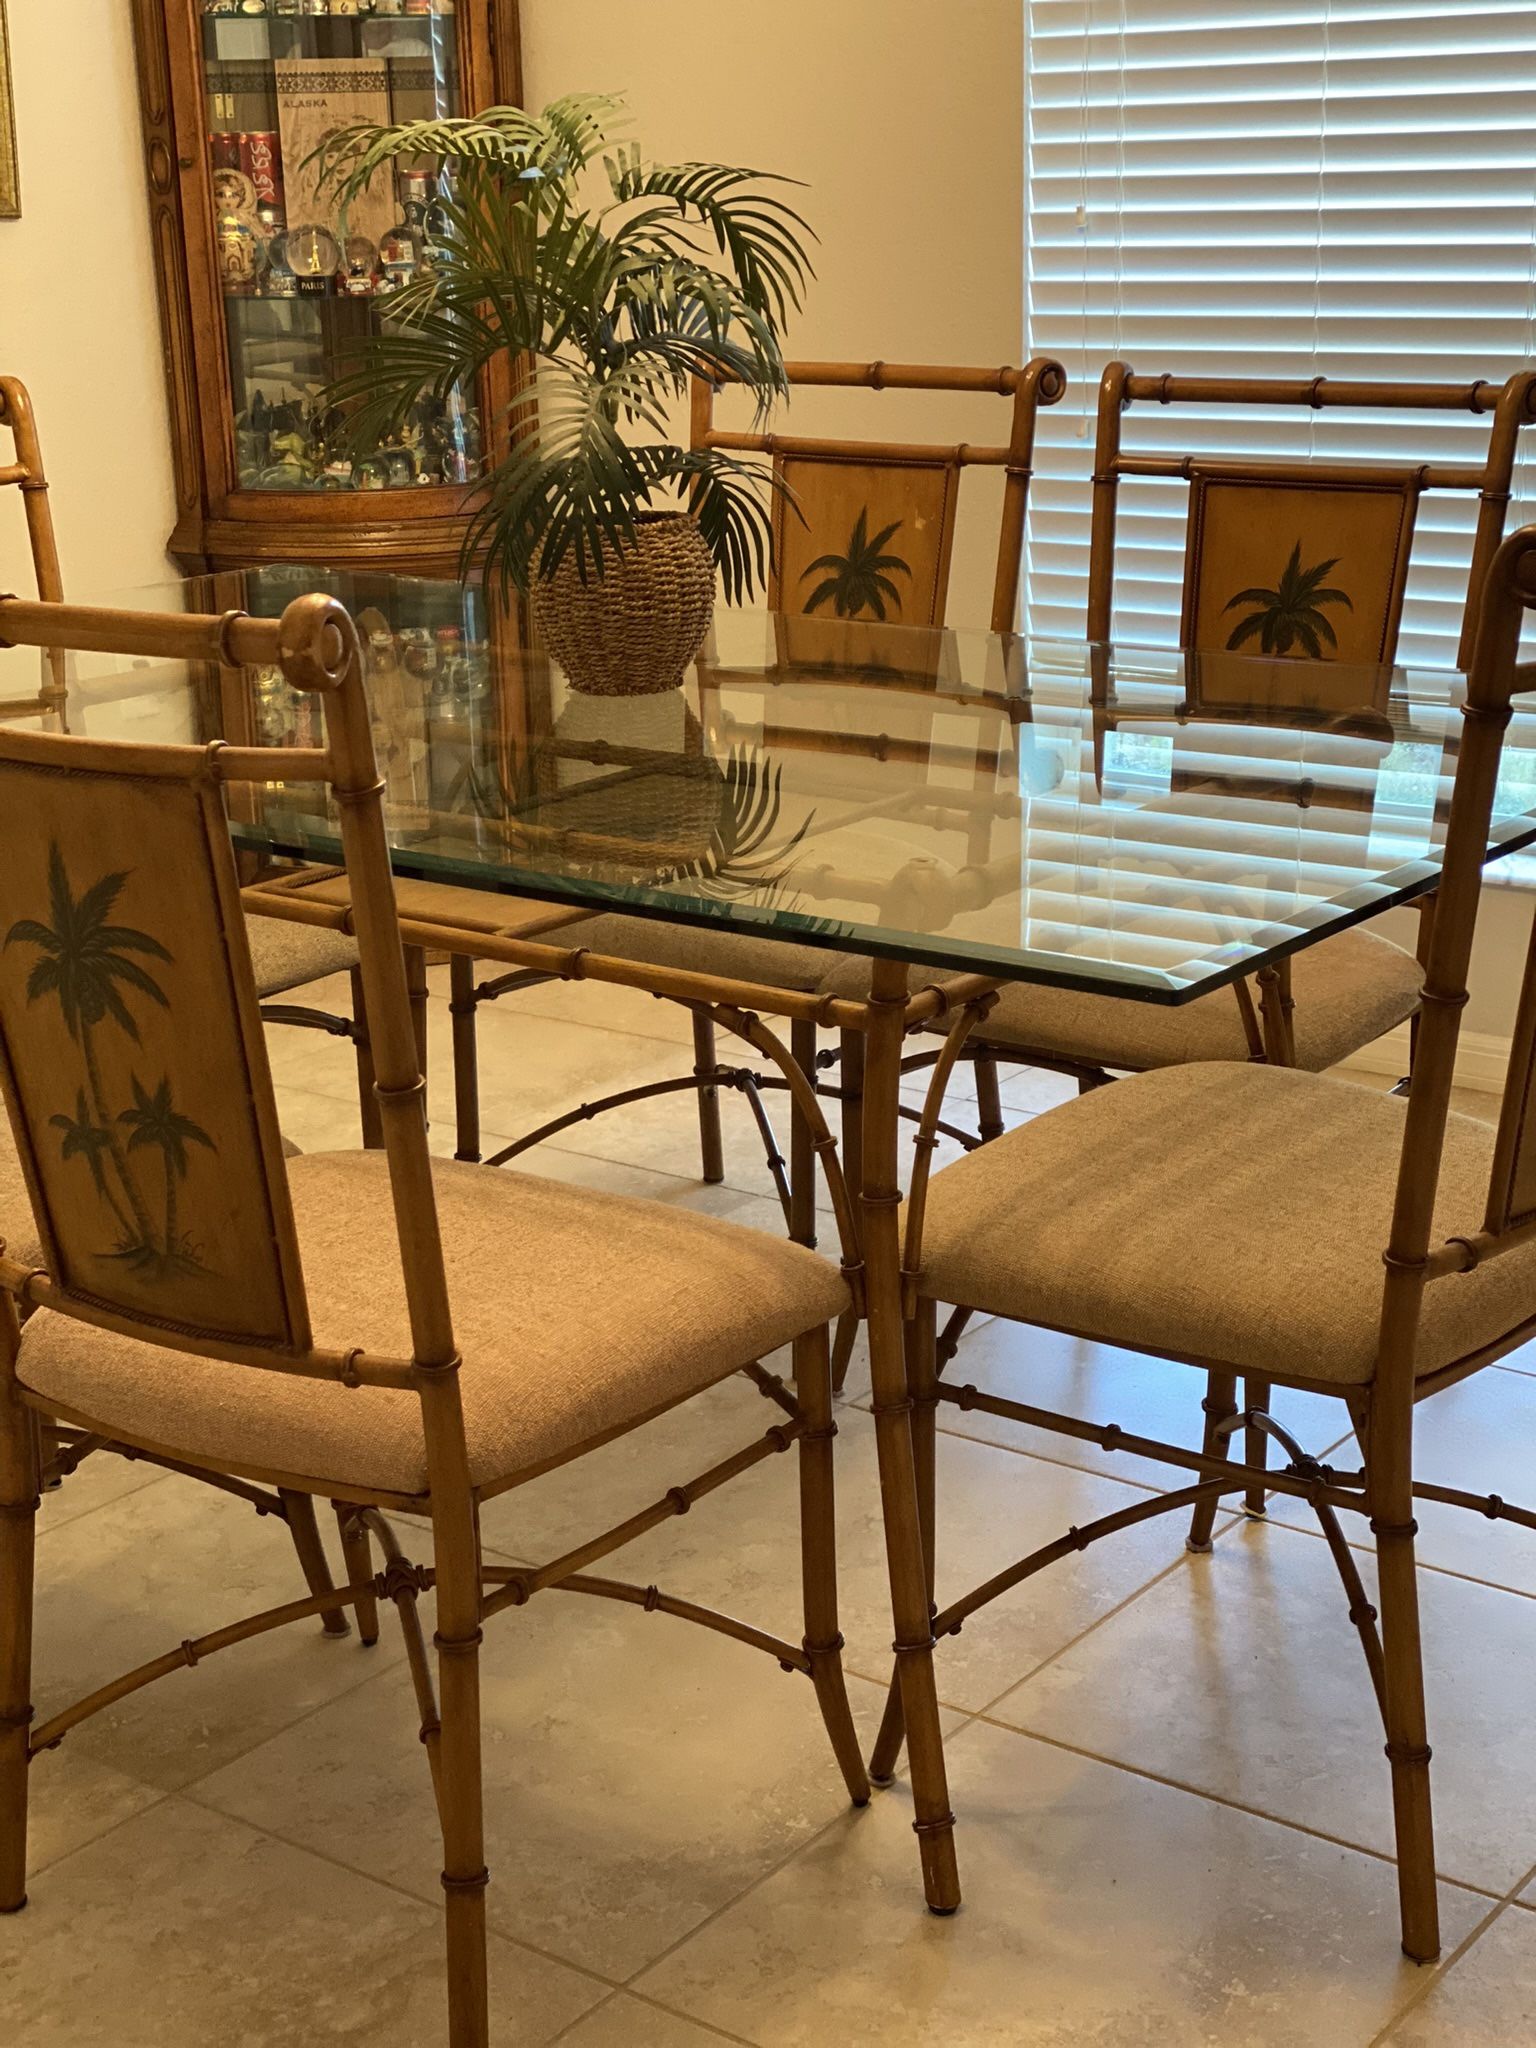 Beautiful Dining Table Set. Modern Glass. Sturdy Metal Chairs With Bamboo Design